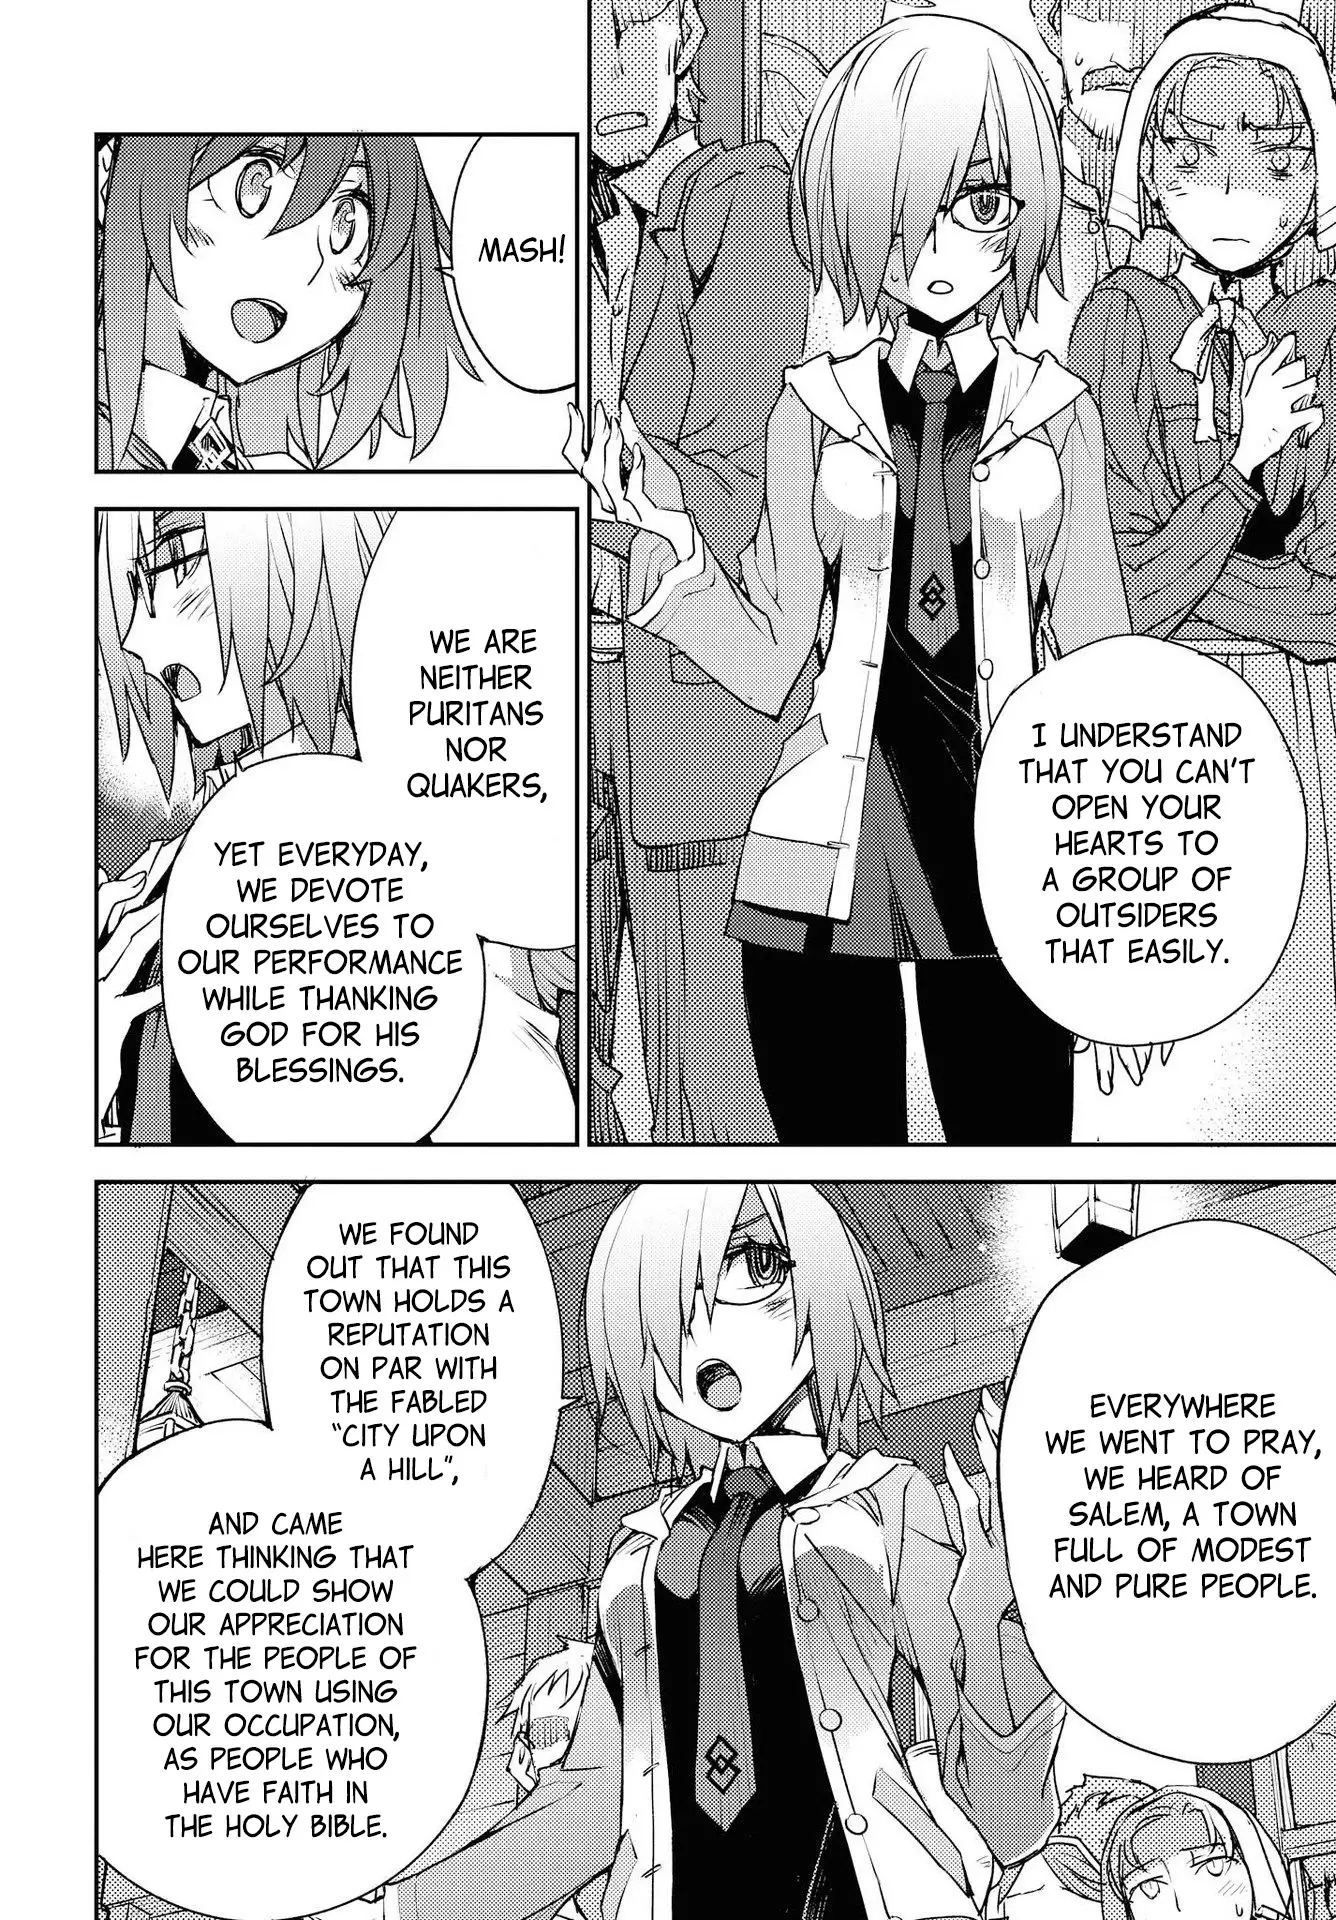 Fate/grand Order: Epic Of Remnant - Subspecies Singularity Iv: Taboo Advent Salem: Salem Of Heresy - 6 page 8